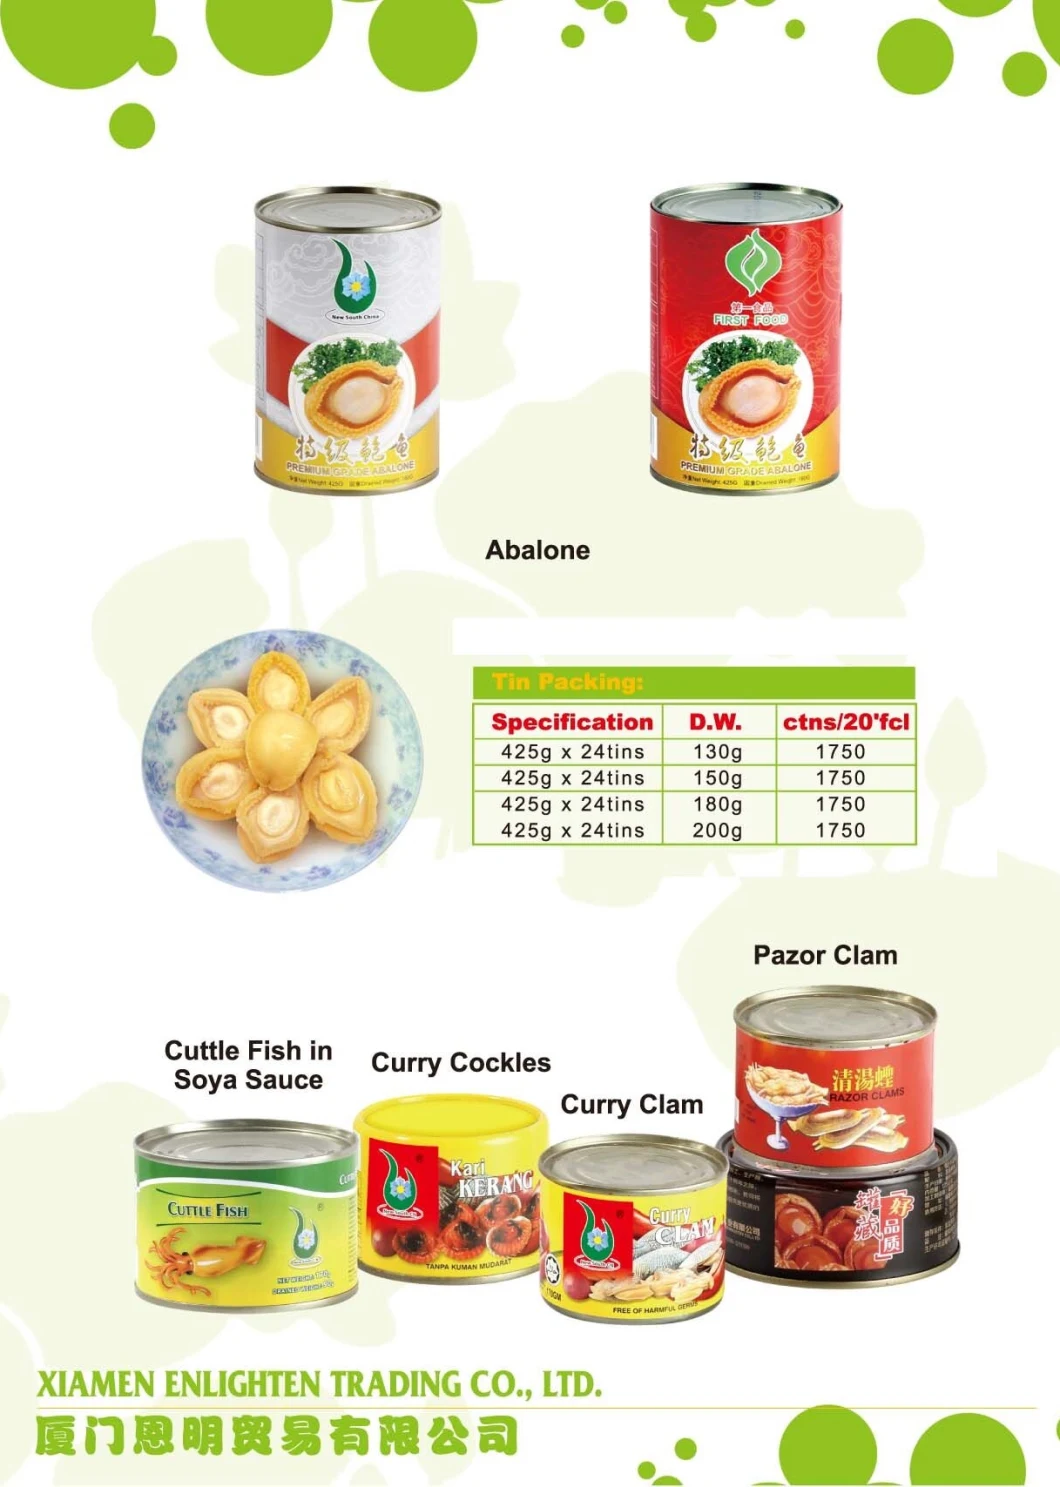 Canned Food Products Hot Sale Canned Mixed Vegetables in Brine